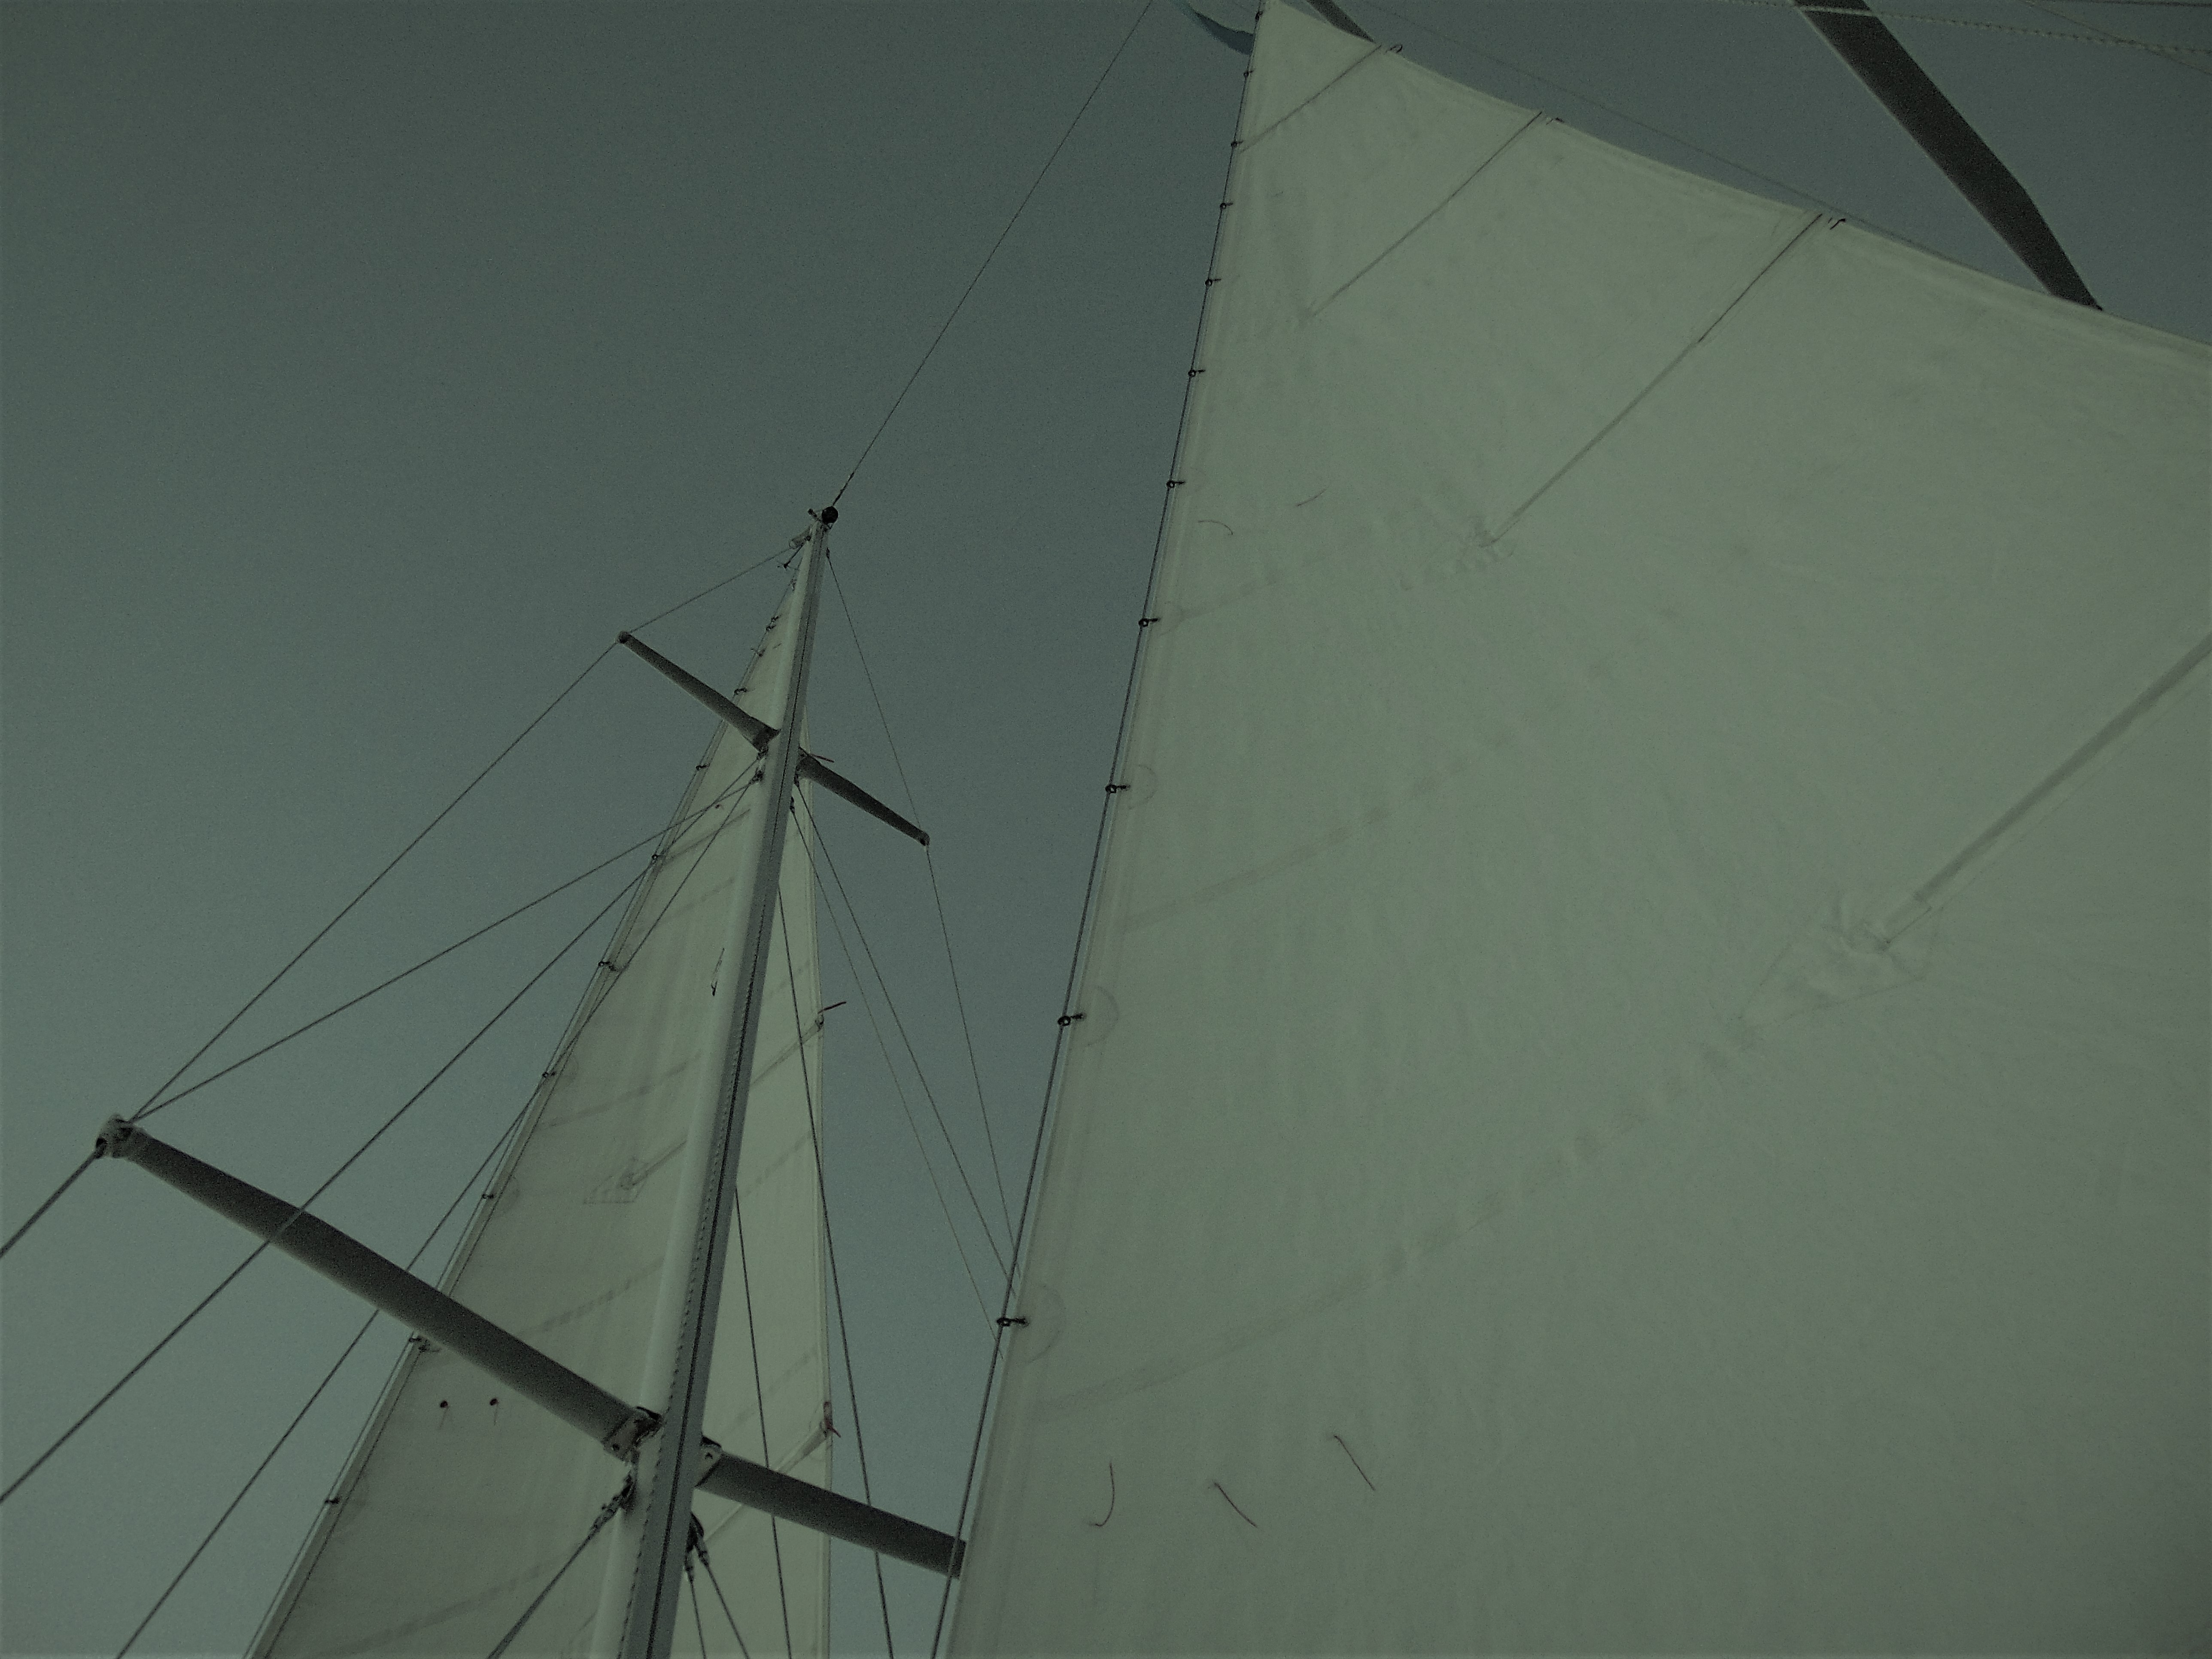 Looking up through the sails to an almost dark sky